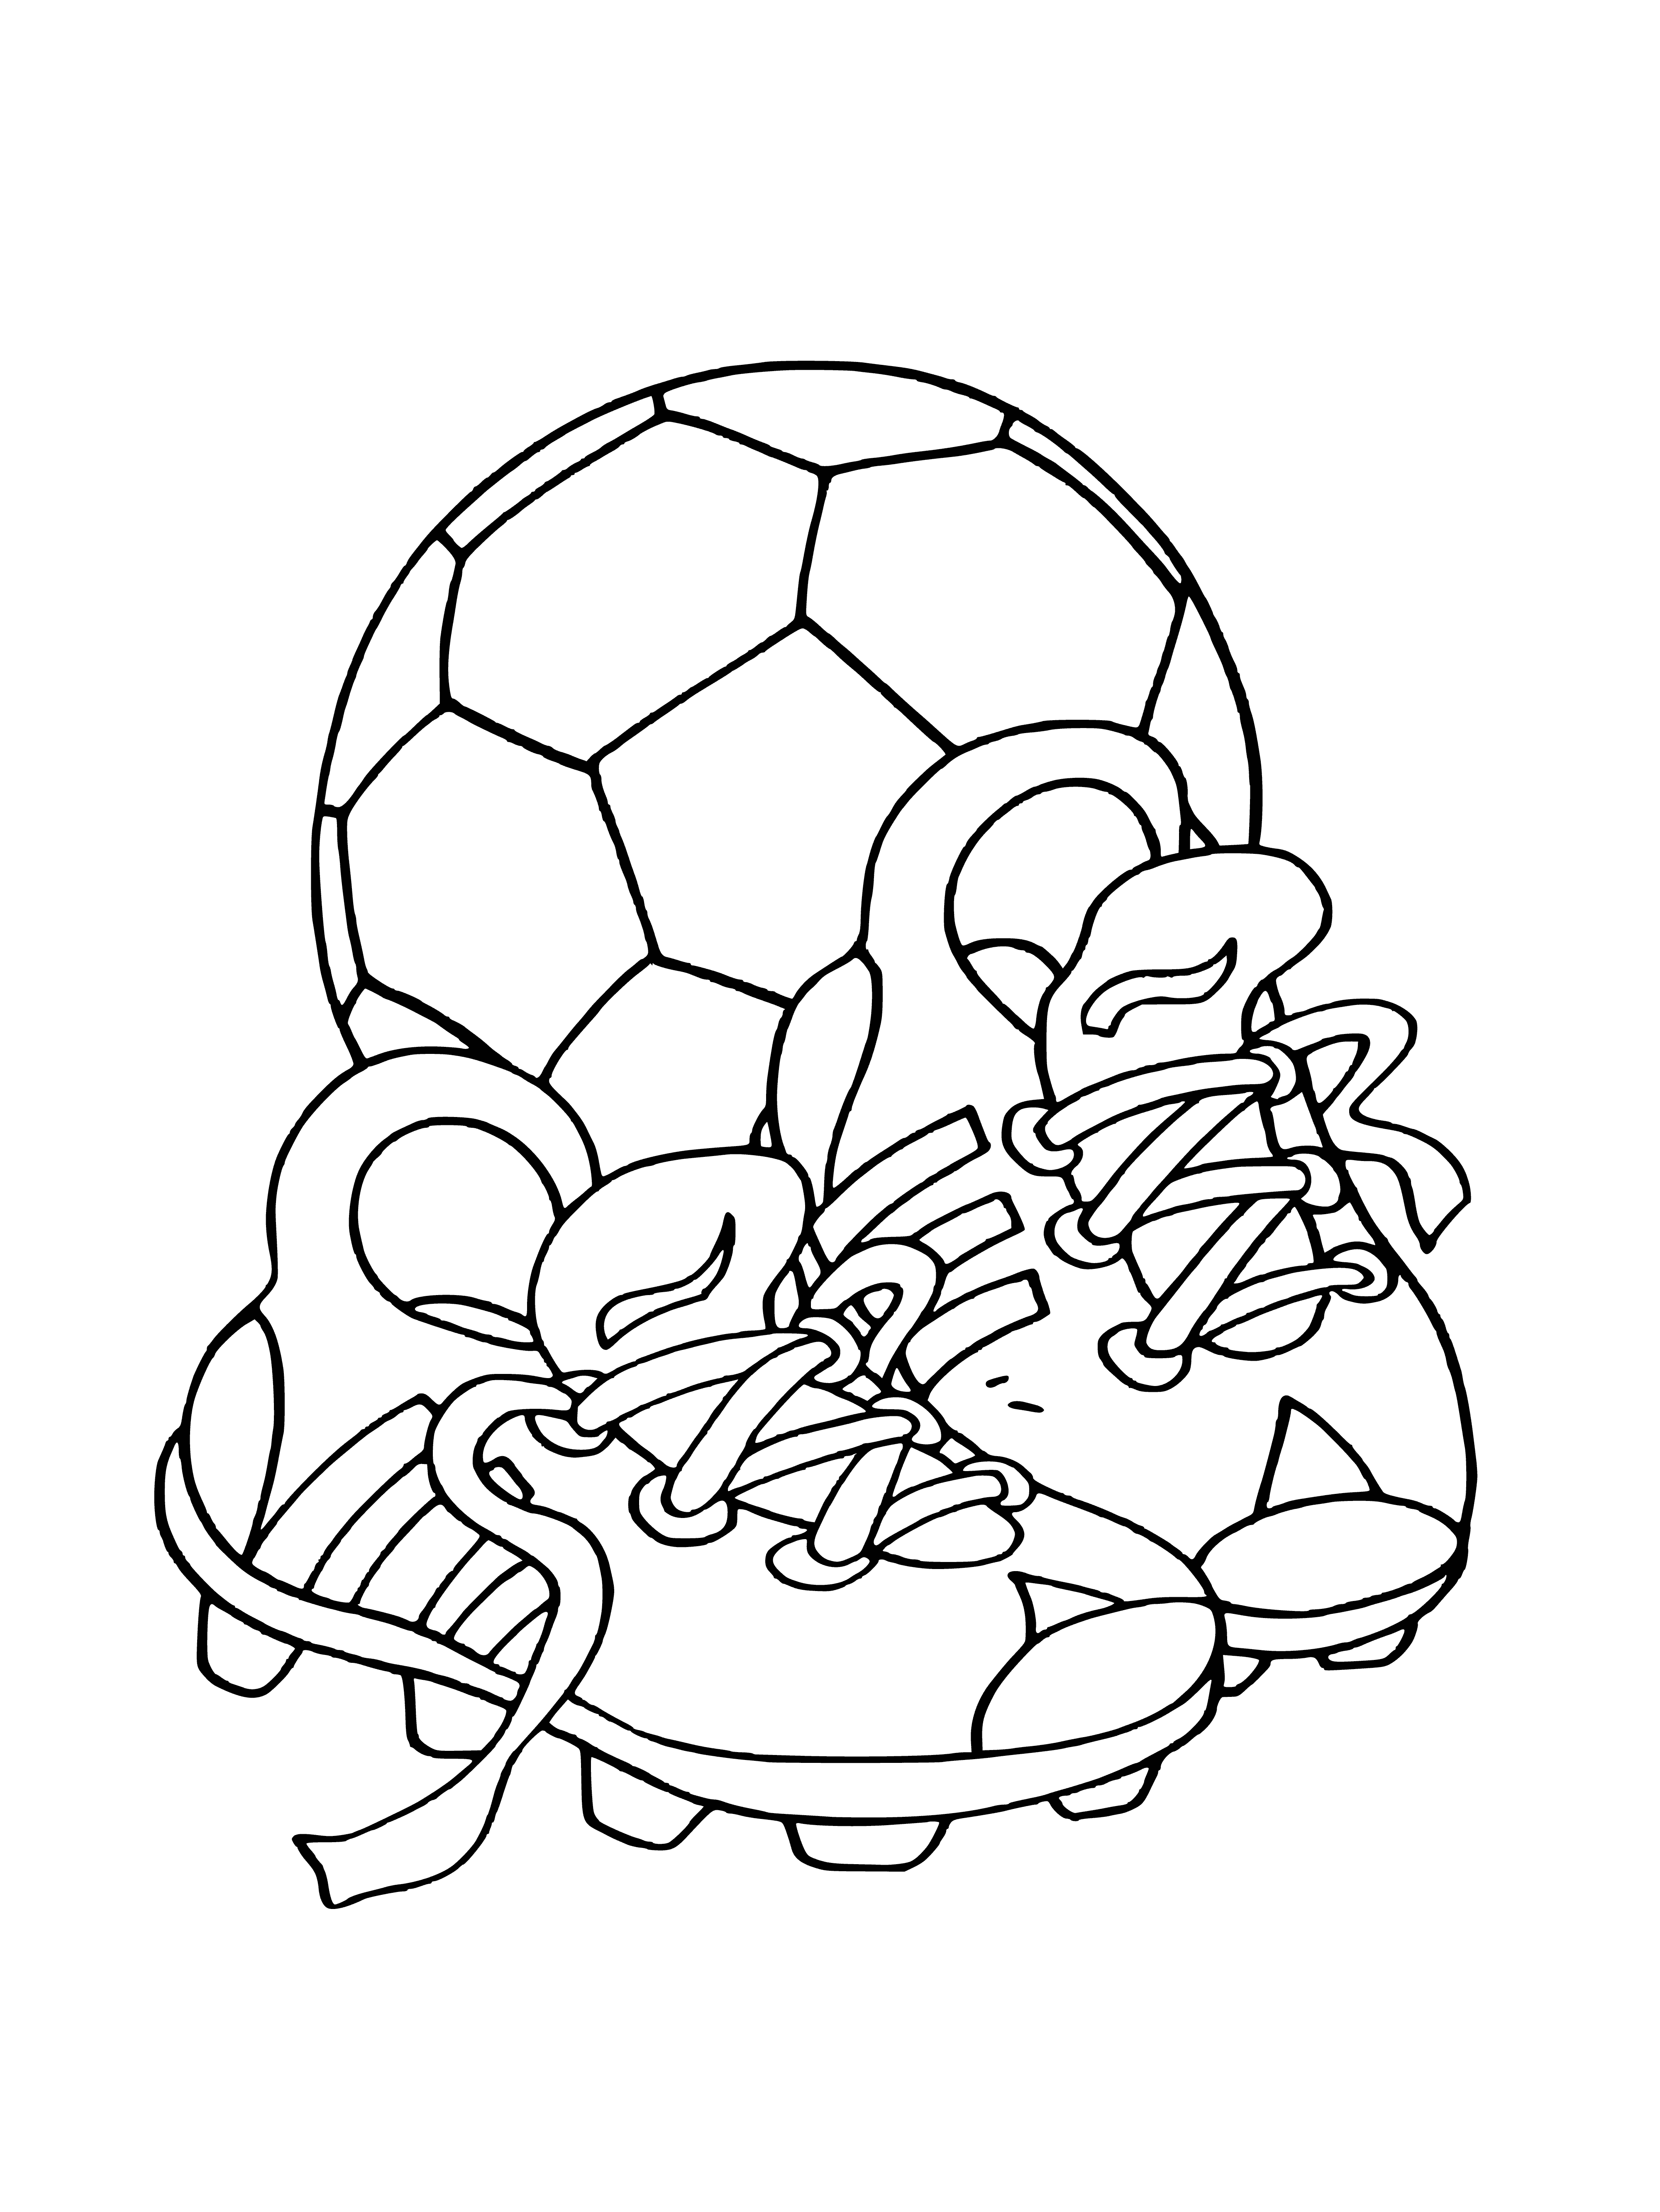 coloring page: Cleats and soccer ball drawn on sport equipment coloring page. Black and white laces and ball.